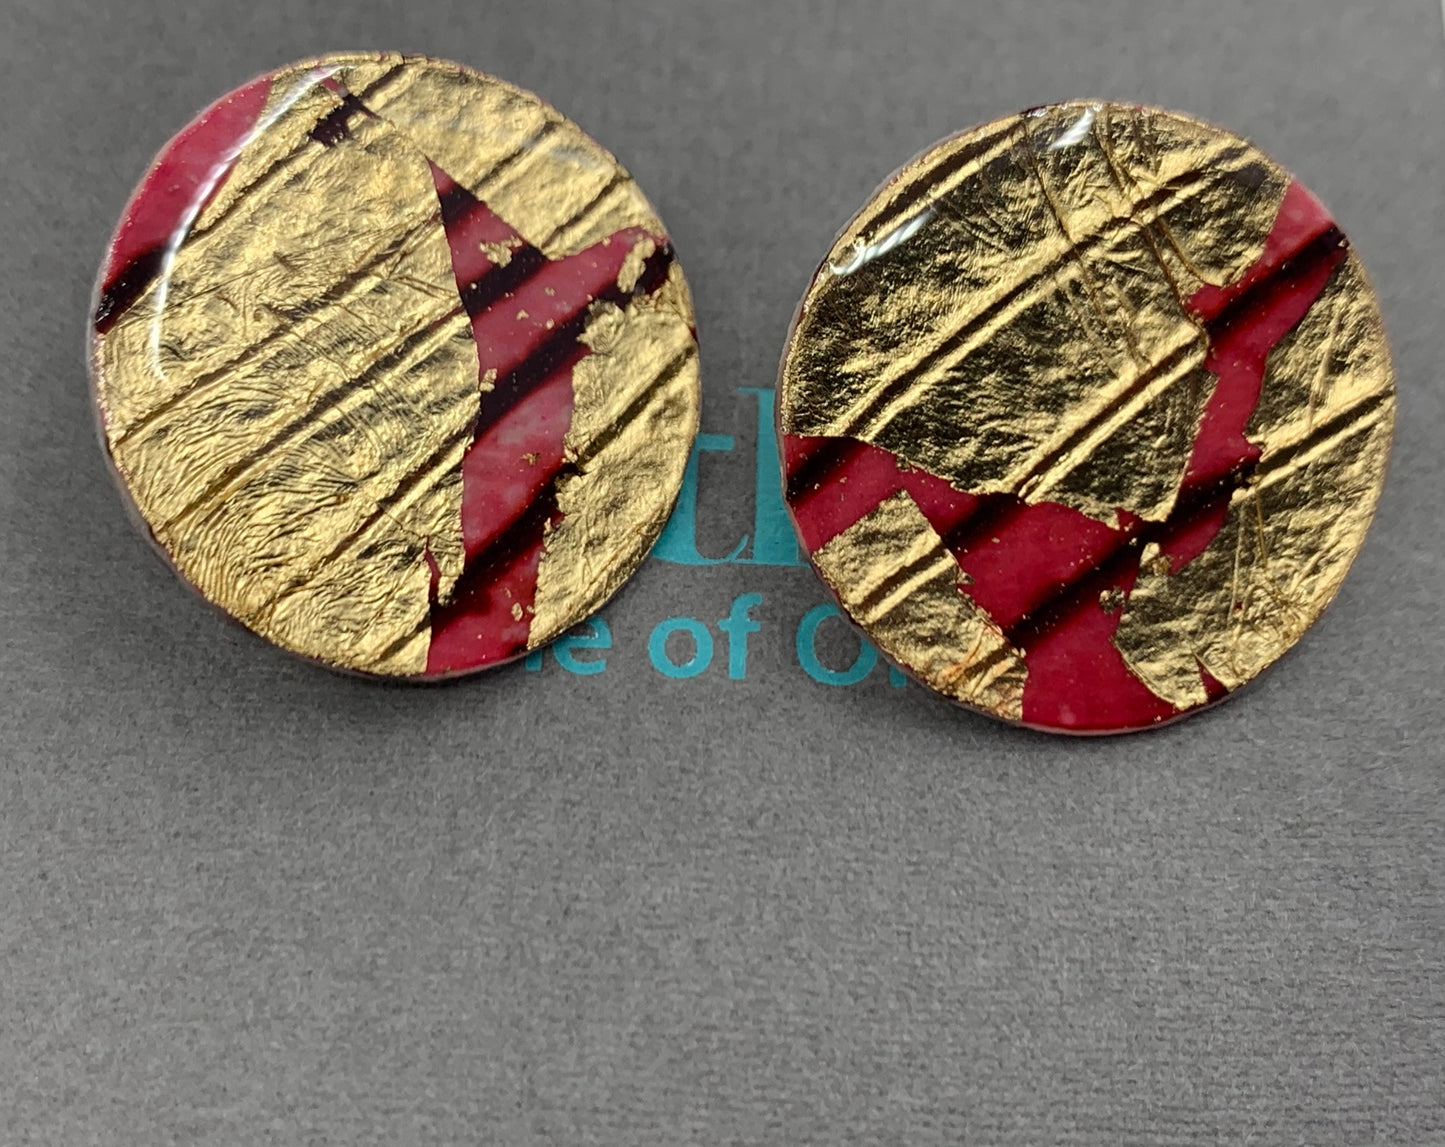 Ró sgraffito earrings in red and gold